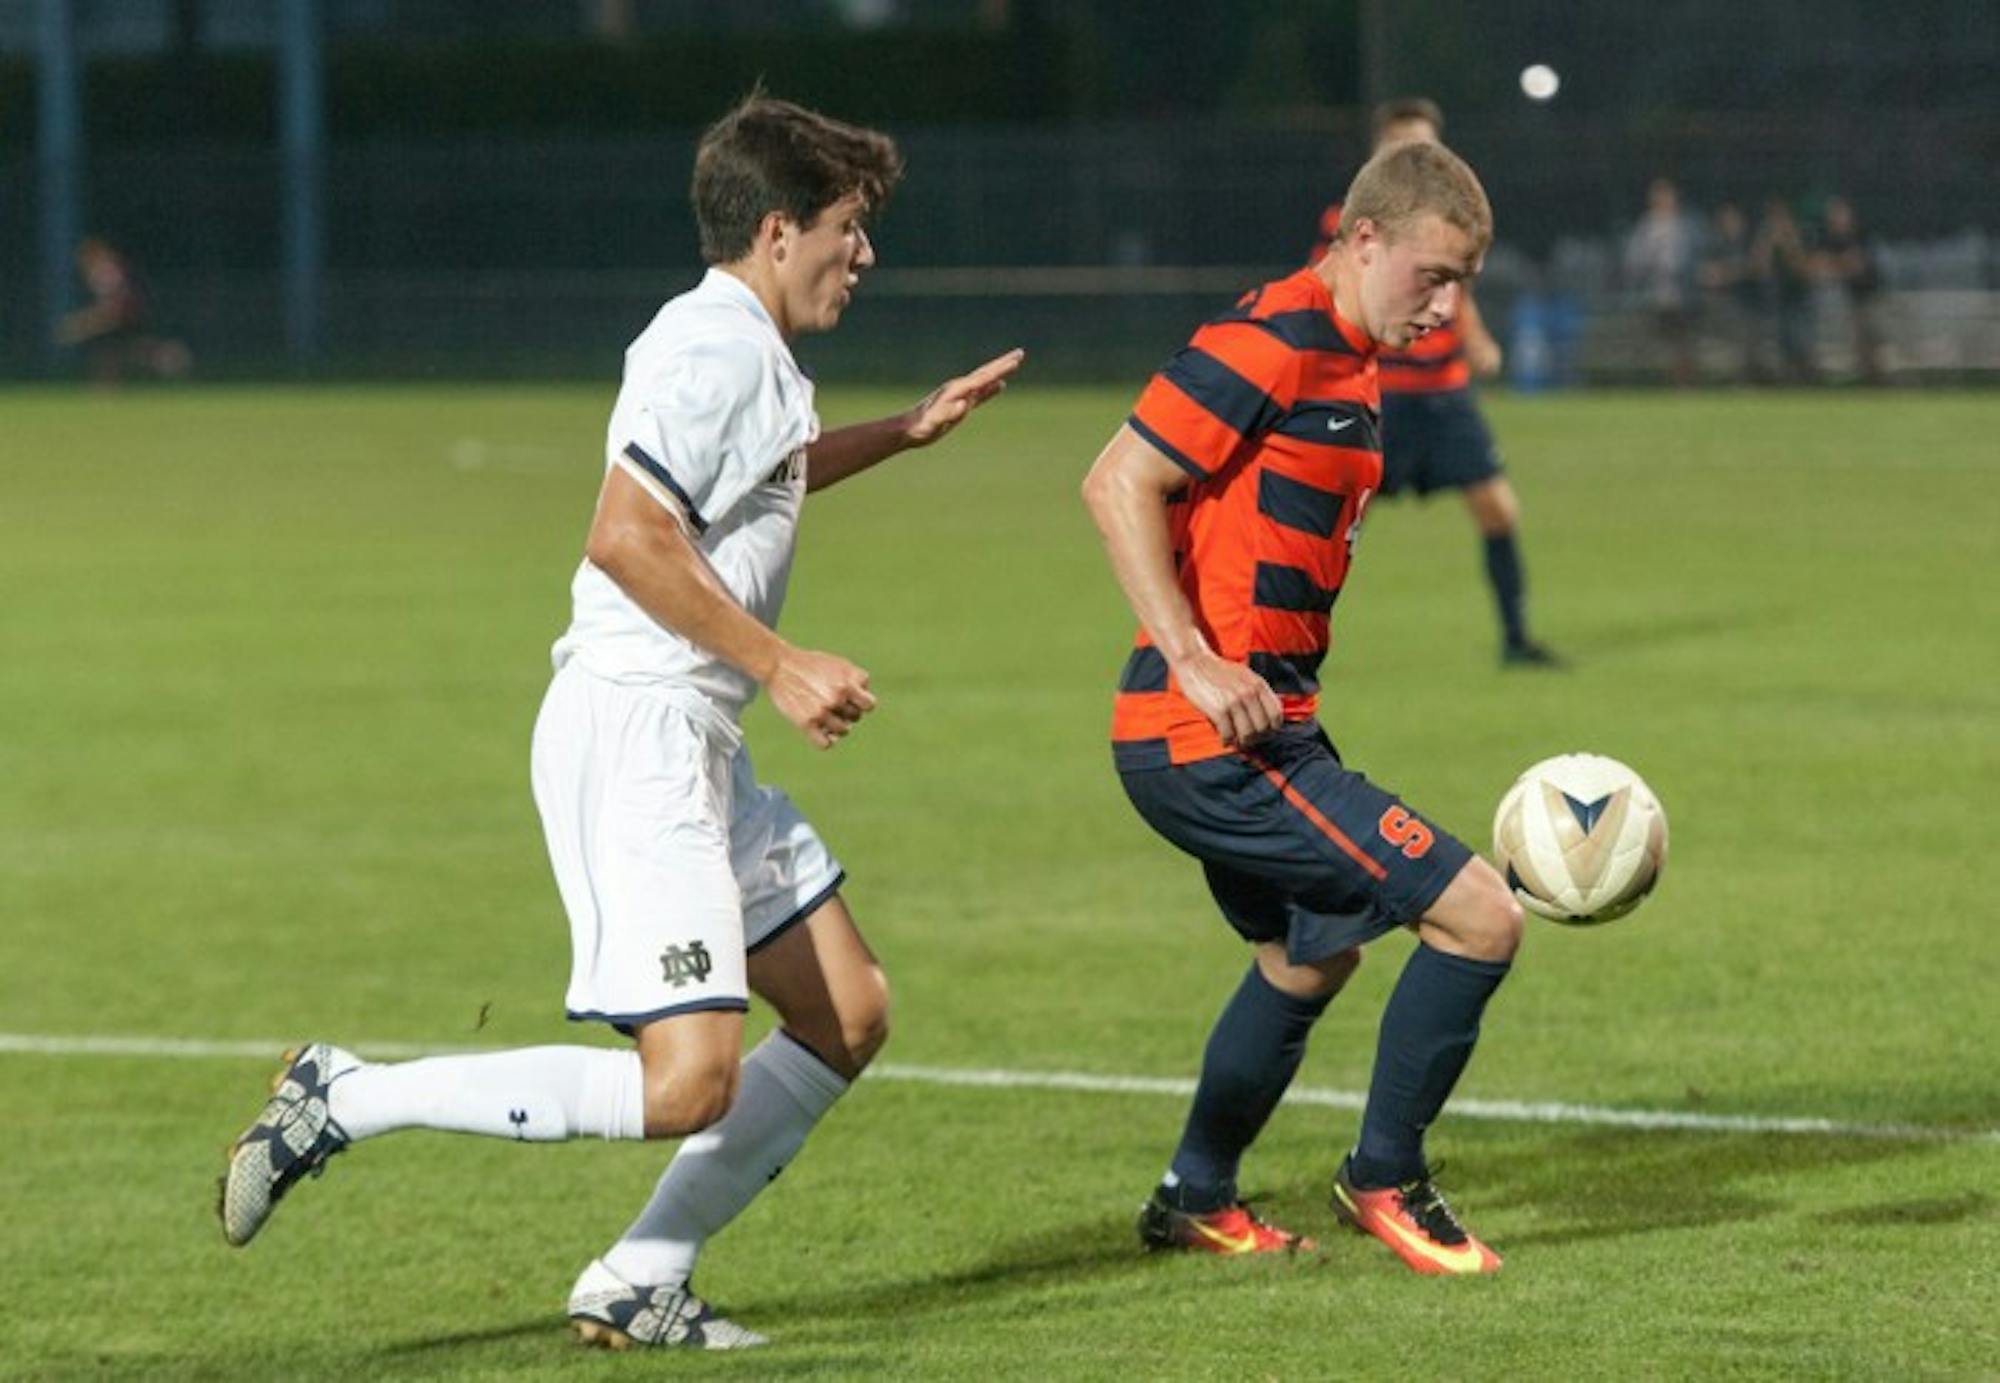 Irish freshman midfielder Jack Casey looks to attack the loose ball during Notre Dame’s 2-1 win over Syracuse on Friday at Alumni Stadium. Casey scored the first goal of the game for the Irish.